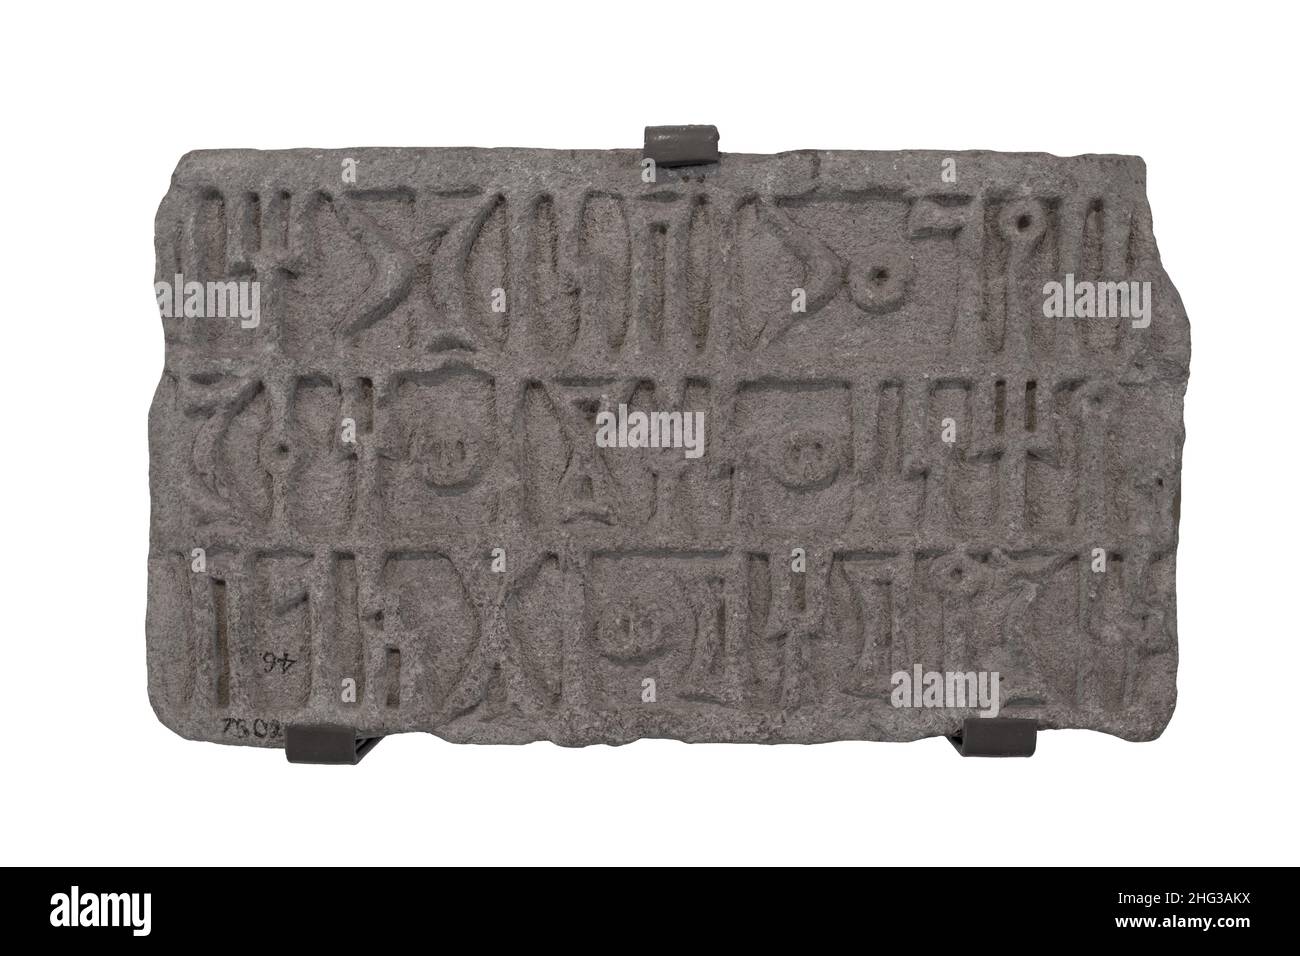 Slab with building inscription of a temple, ancient South Arabian script, dedicated to God Talab. 3rd century CE. Istanbul Archeology Museum. Stock Photo